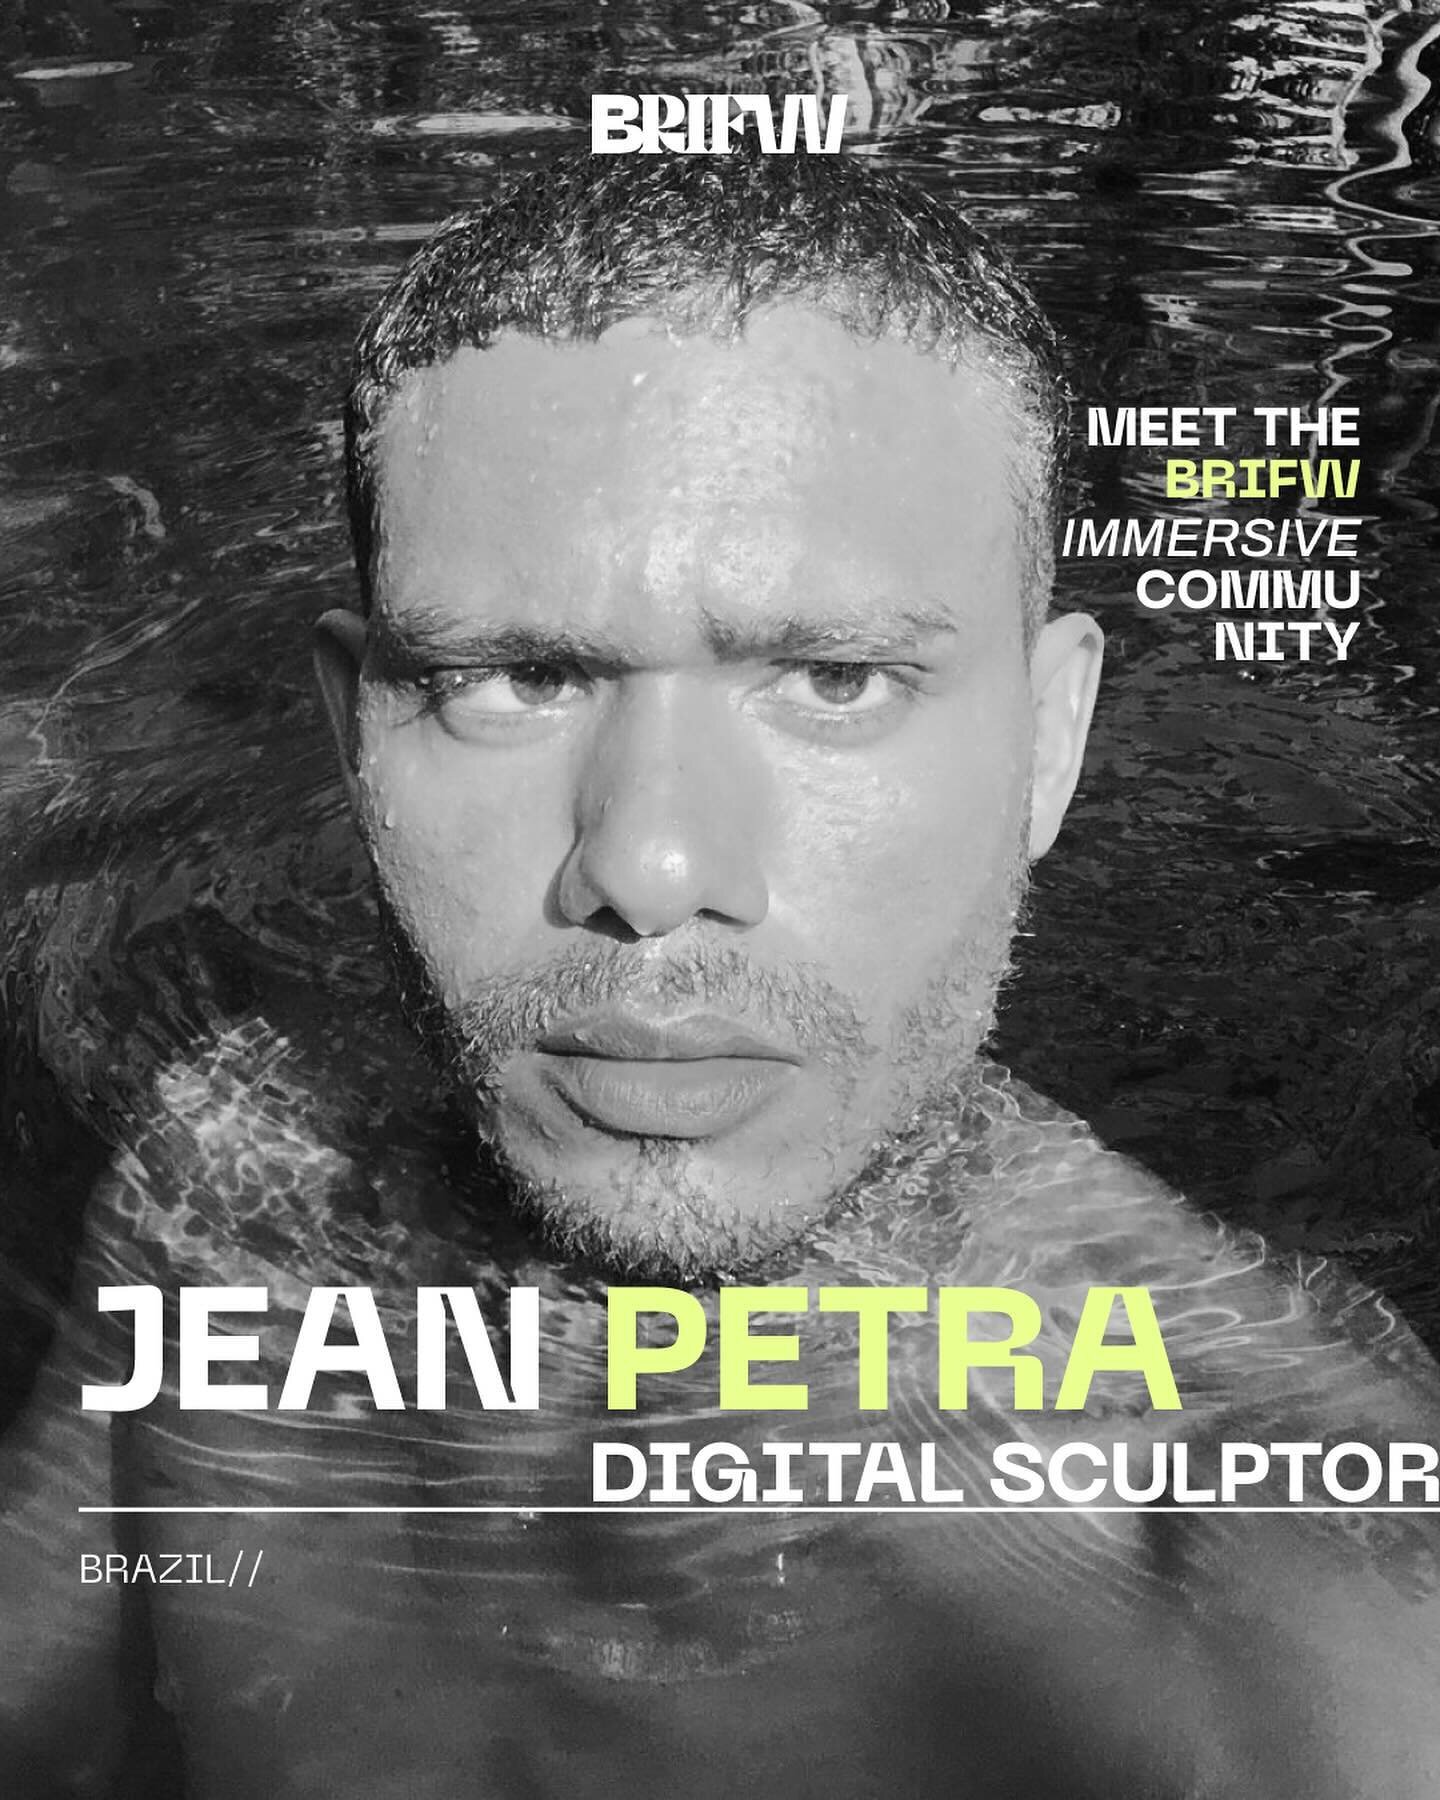 Meet the BRIFW Immersive Community - JEAN PETRA 👾

Jean Petra is a Brazilian digital sculptor whose roots and work are linked to the Amazon rainforest.

His work talks about a new fictional narrative created from his experiences and the people aroun